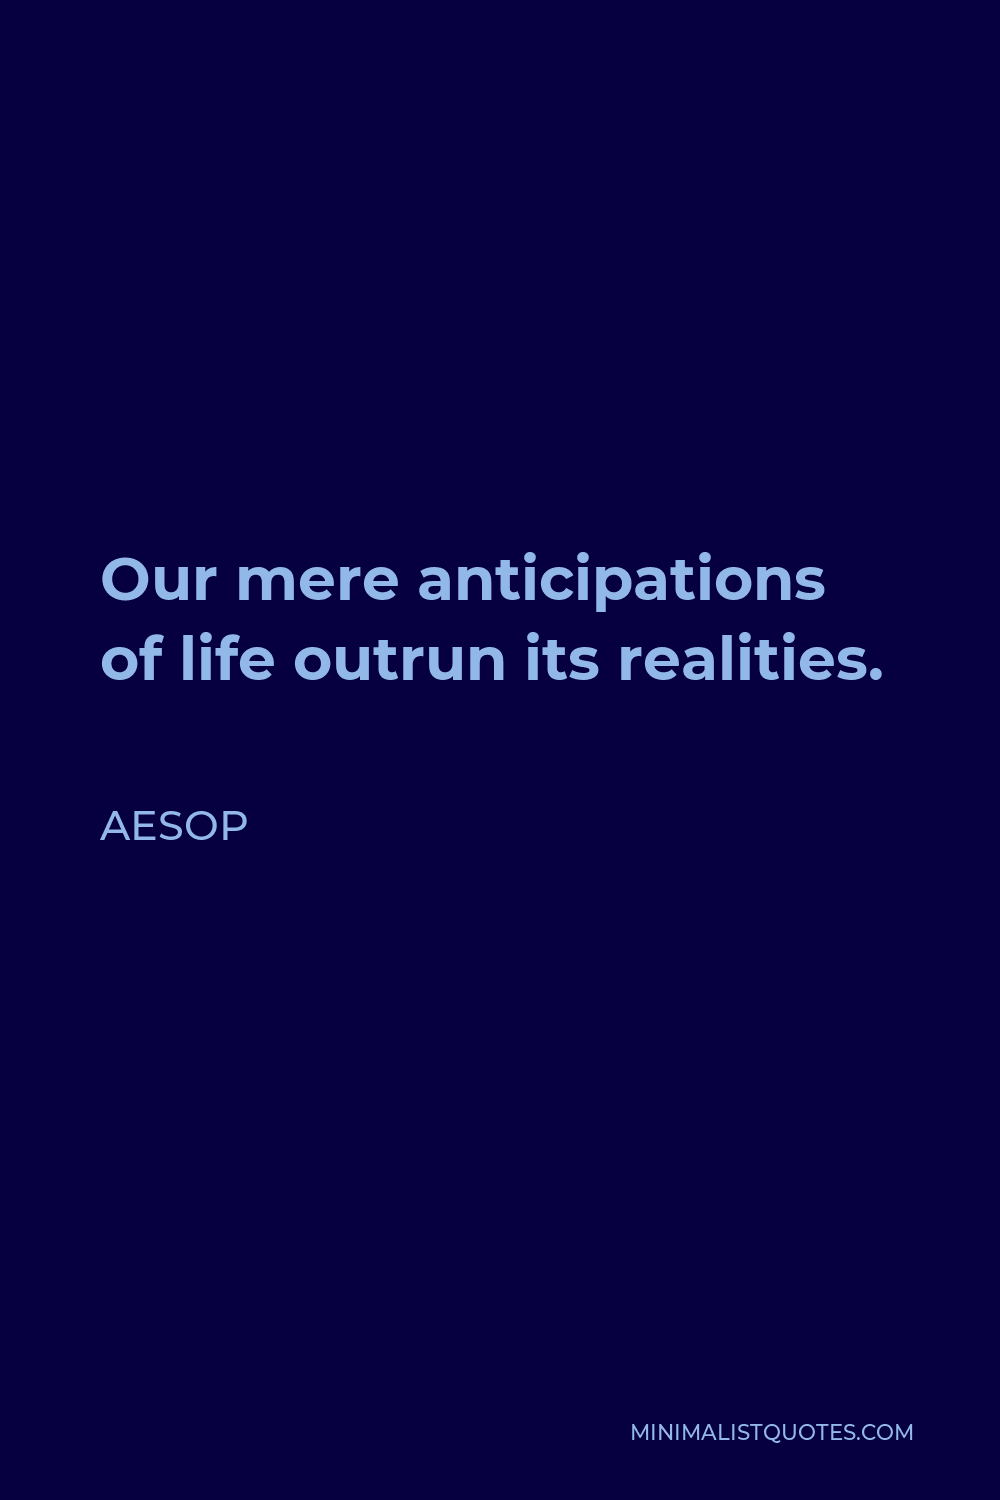 Aesop Quote - Our mere anticipations of life outrun its realities.